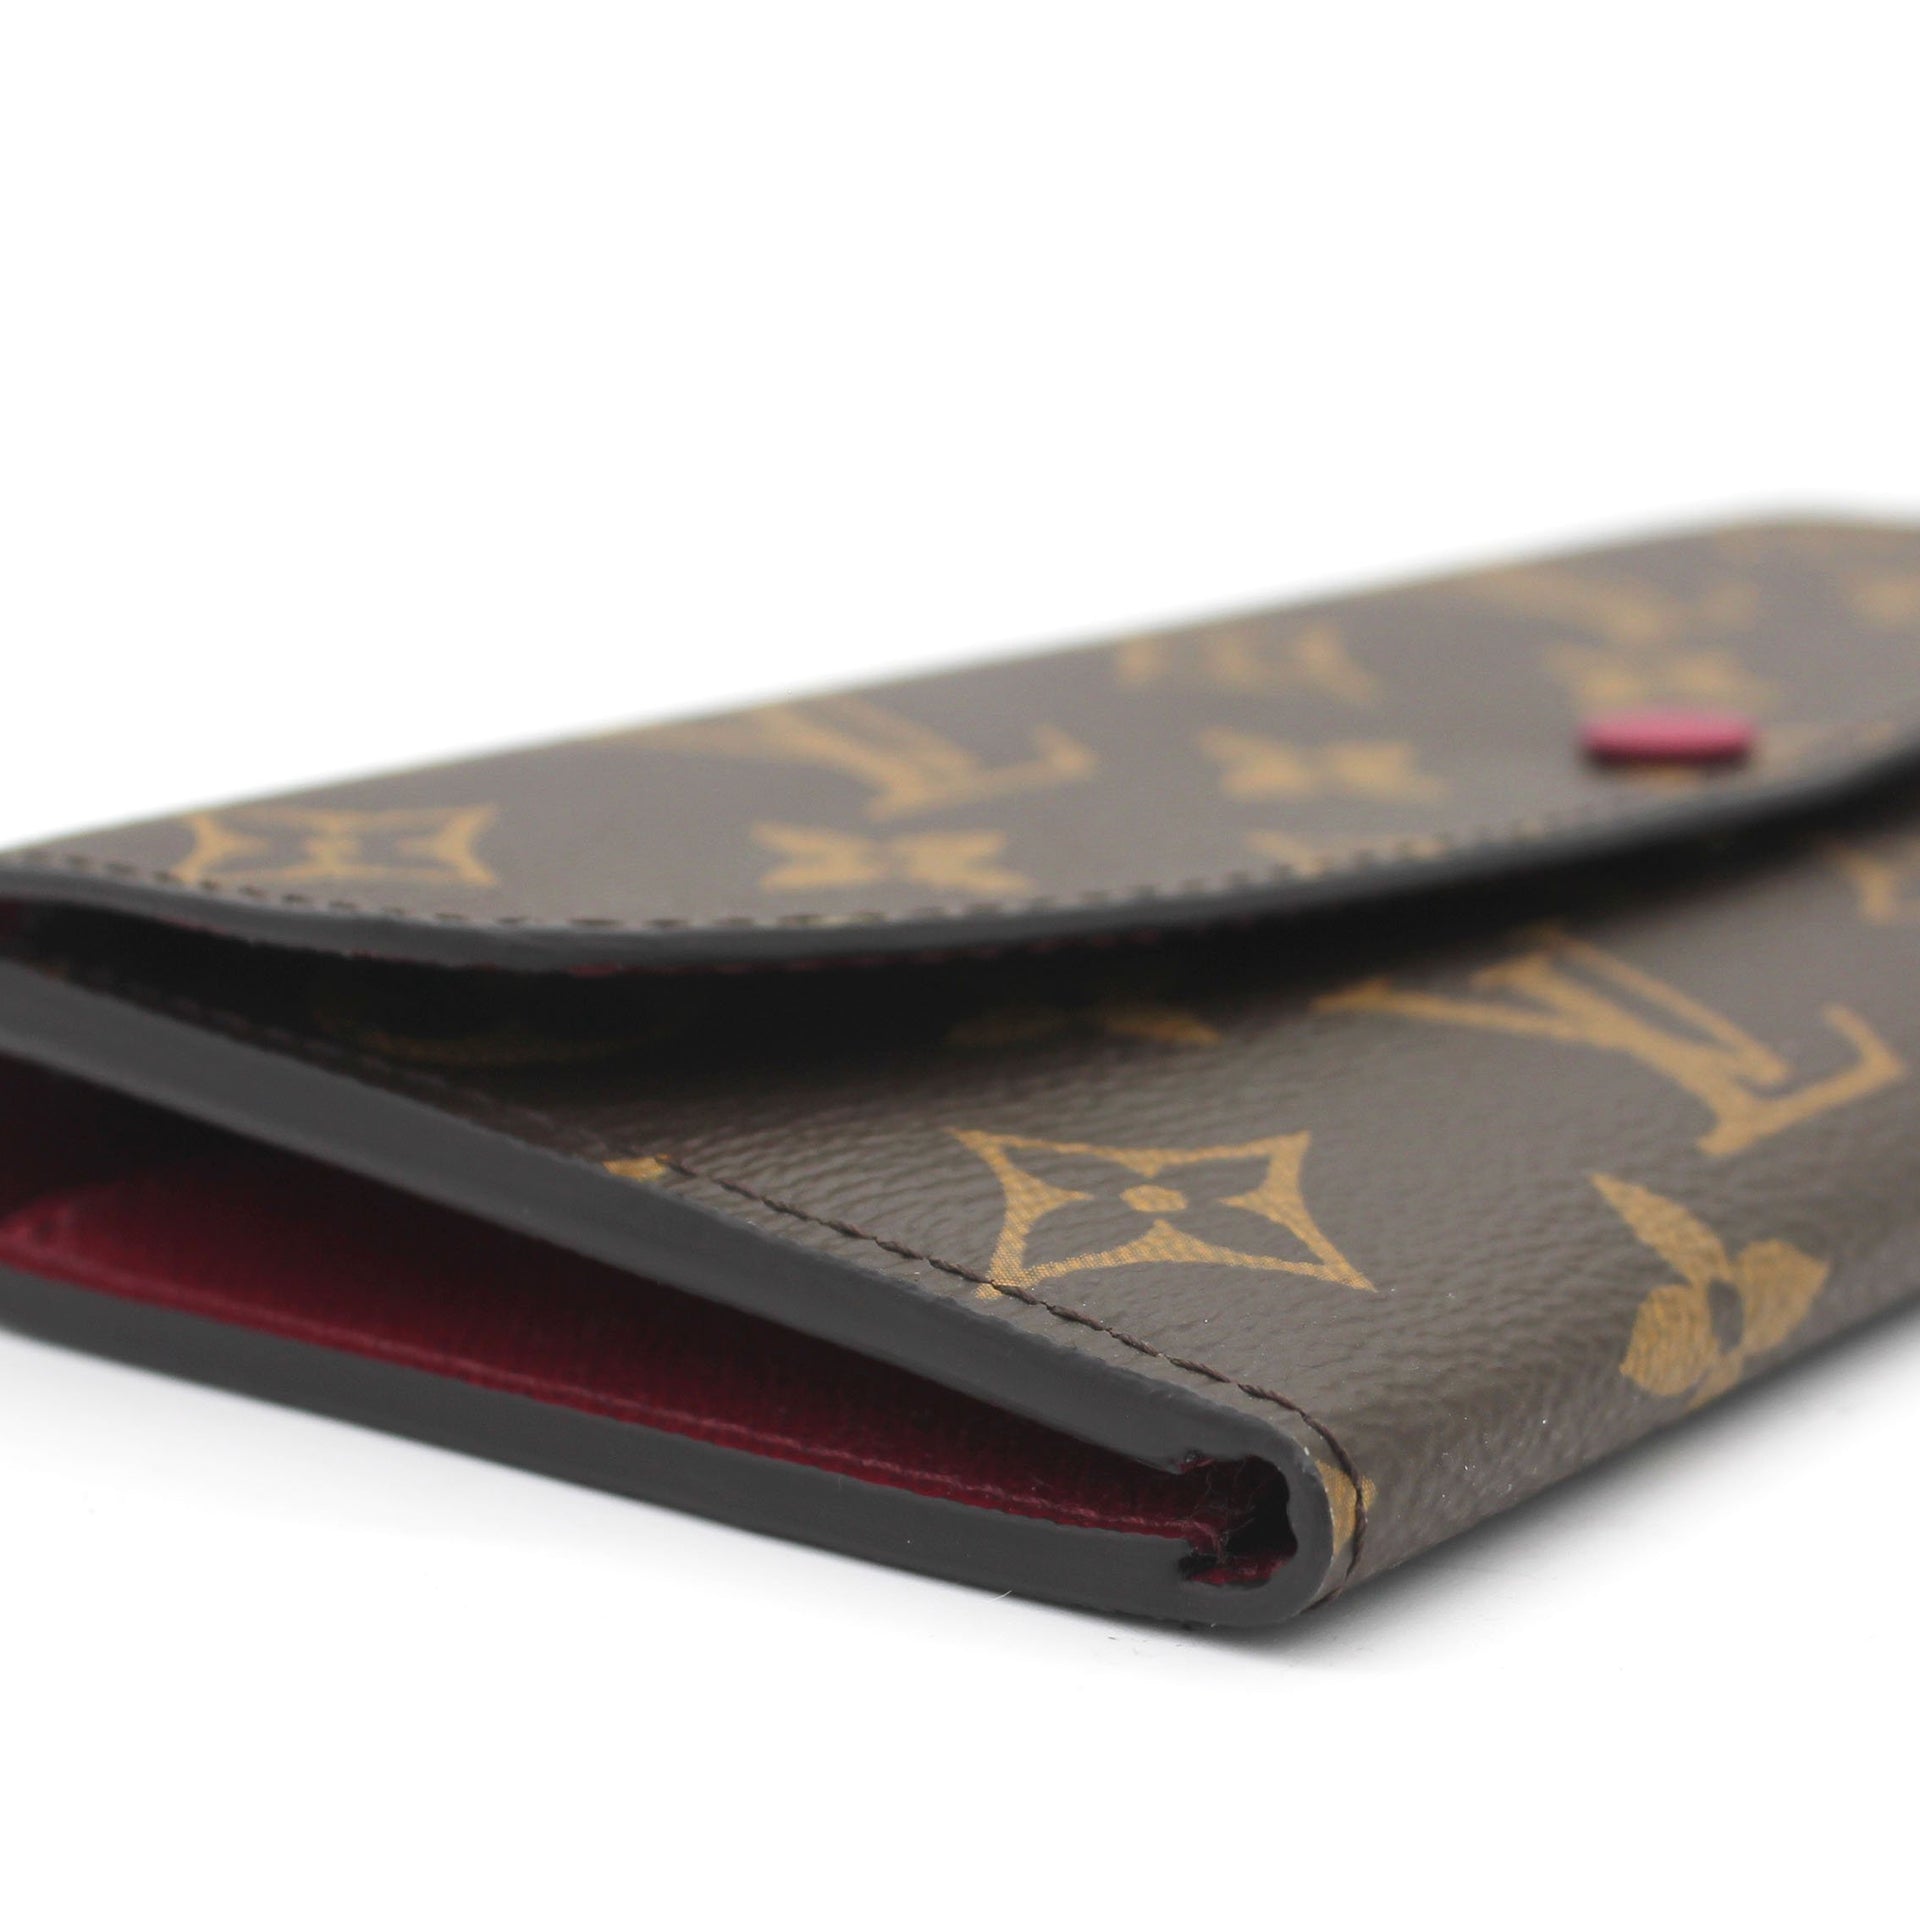 Louis Vuitton Emilie Wallet in fuchsia. Love it - and it holds my iPhone 6.  Lovely wallet!